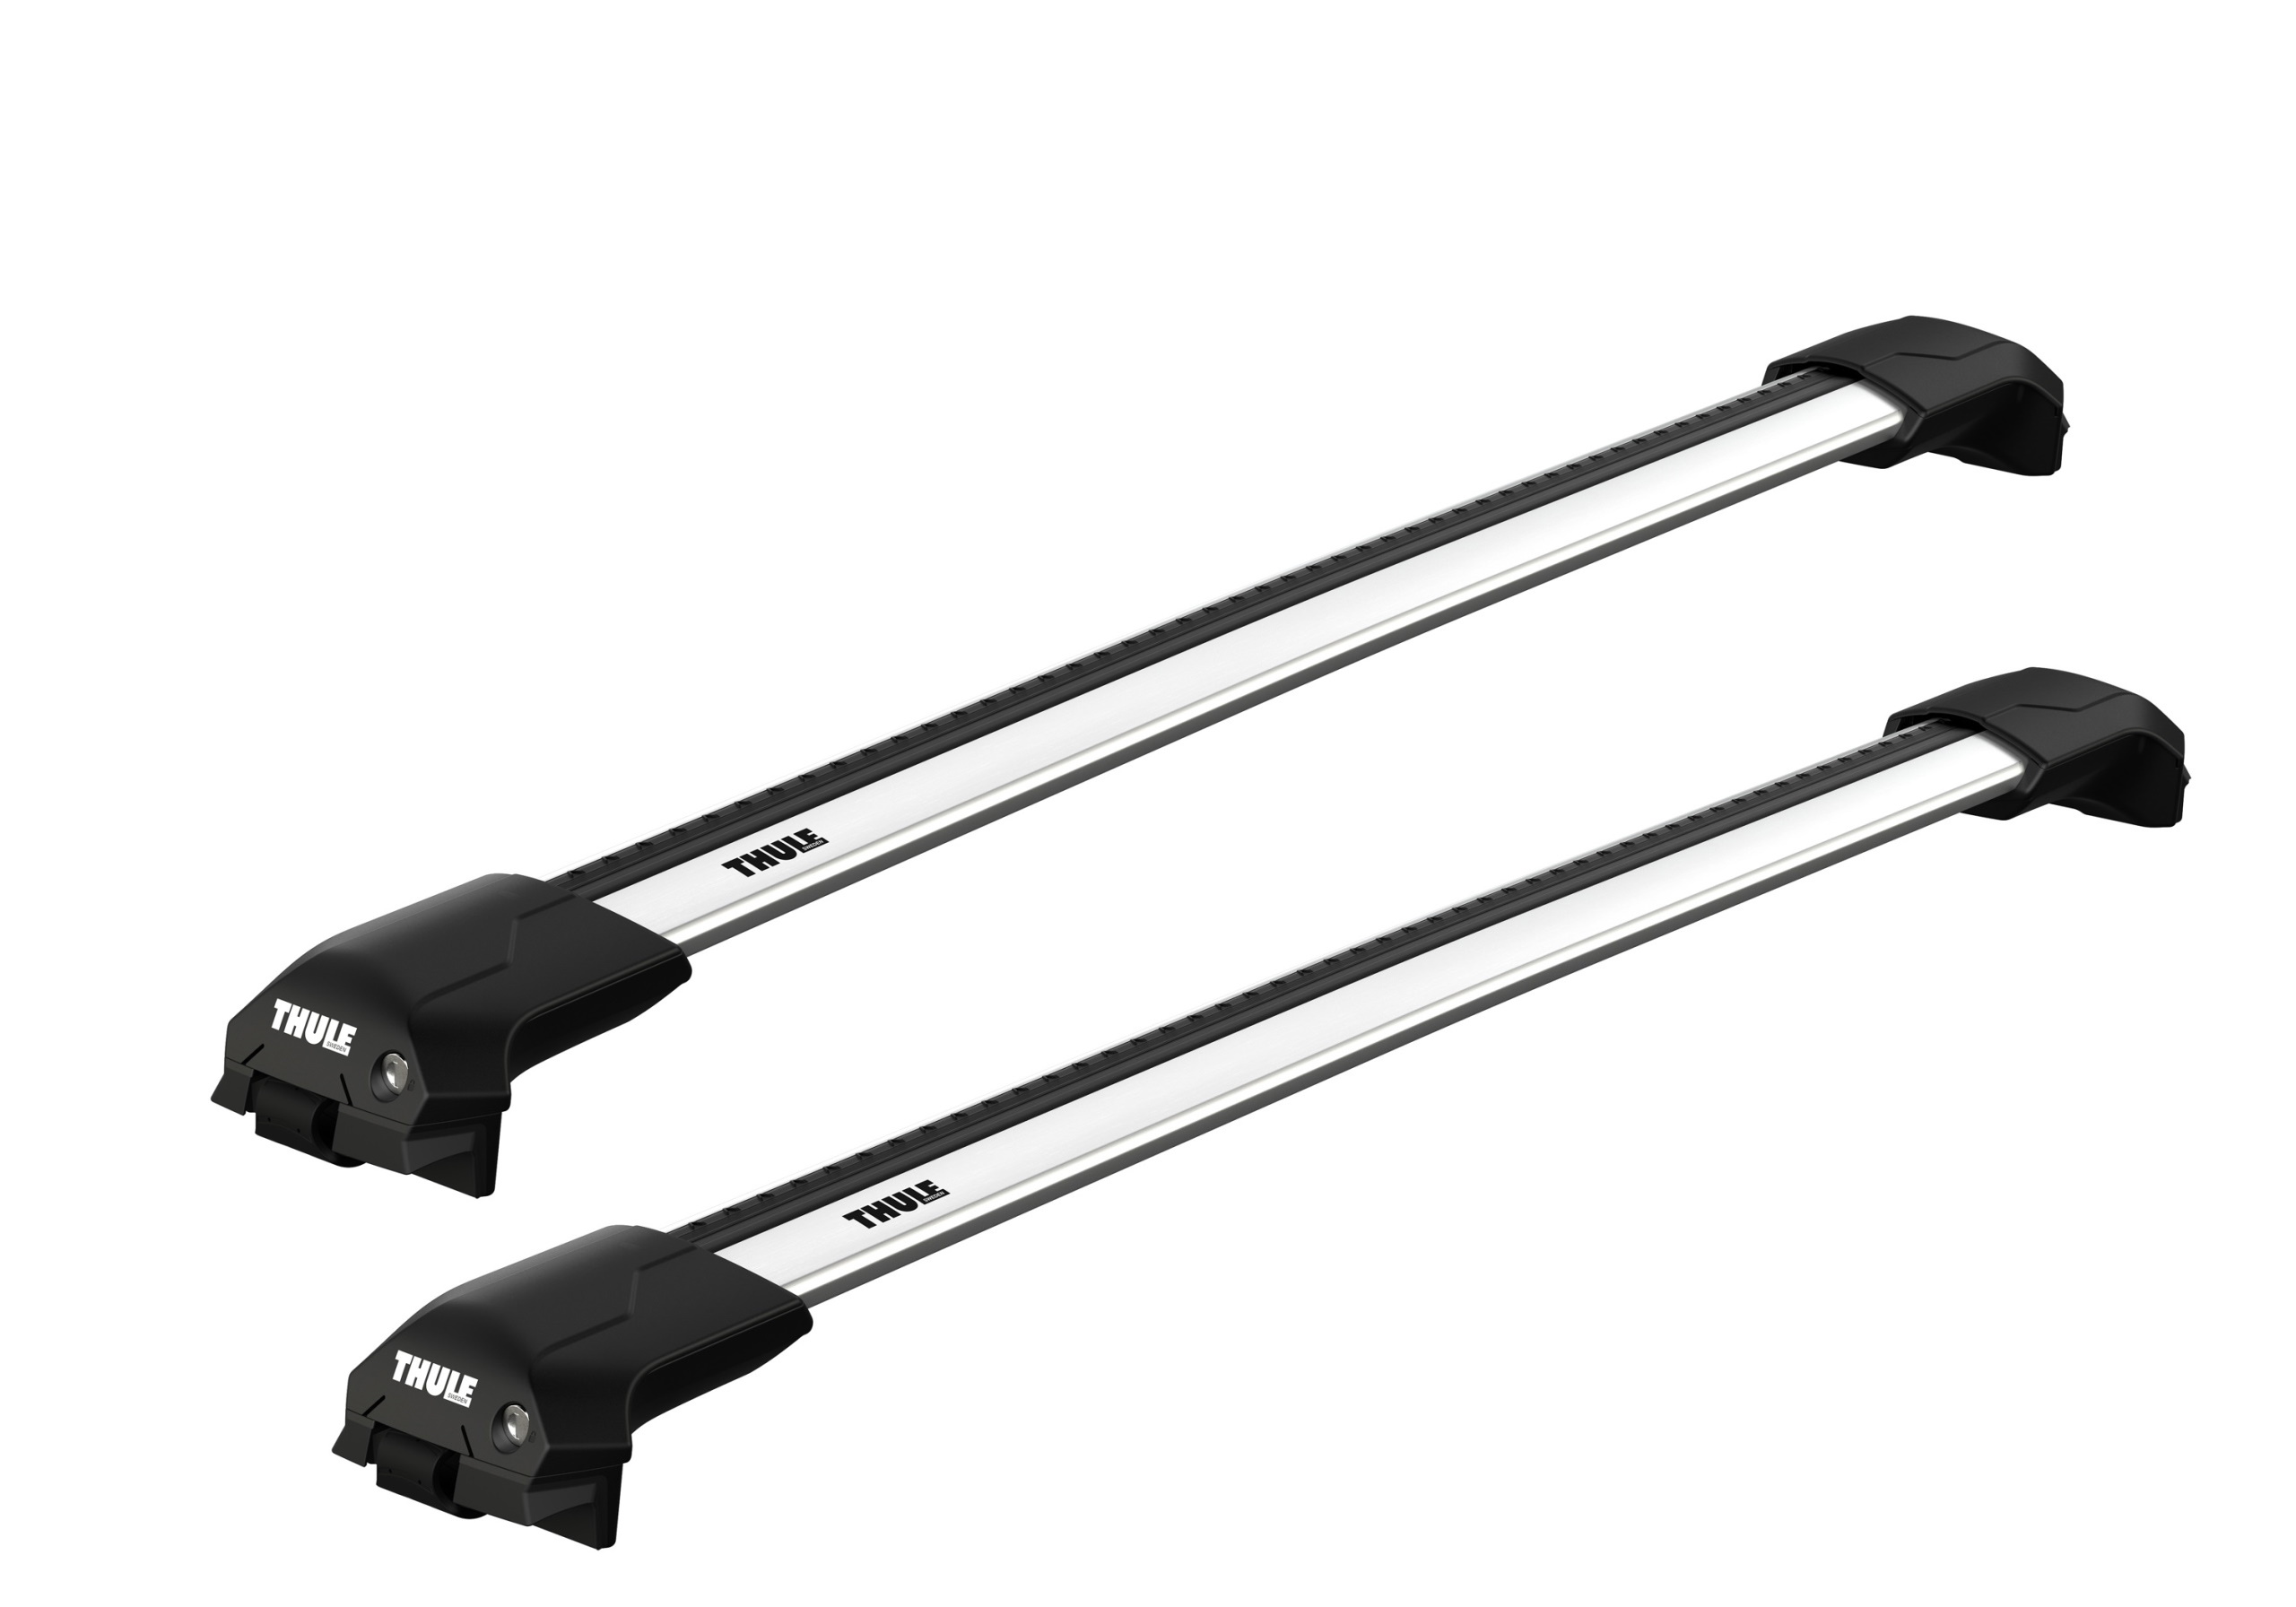 Audi A6 Allroad (2006 to 2012):Thule Edge silver WingBars package - 7204, 7213, 7213